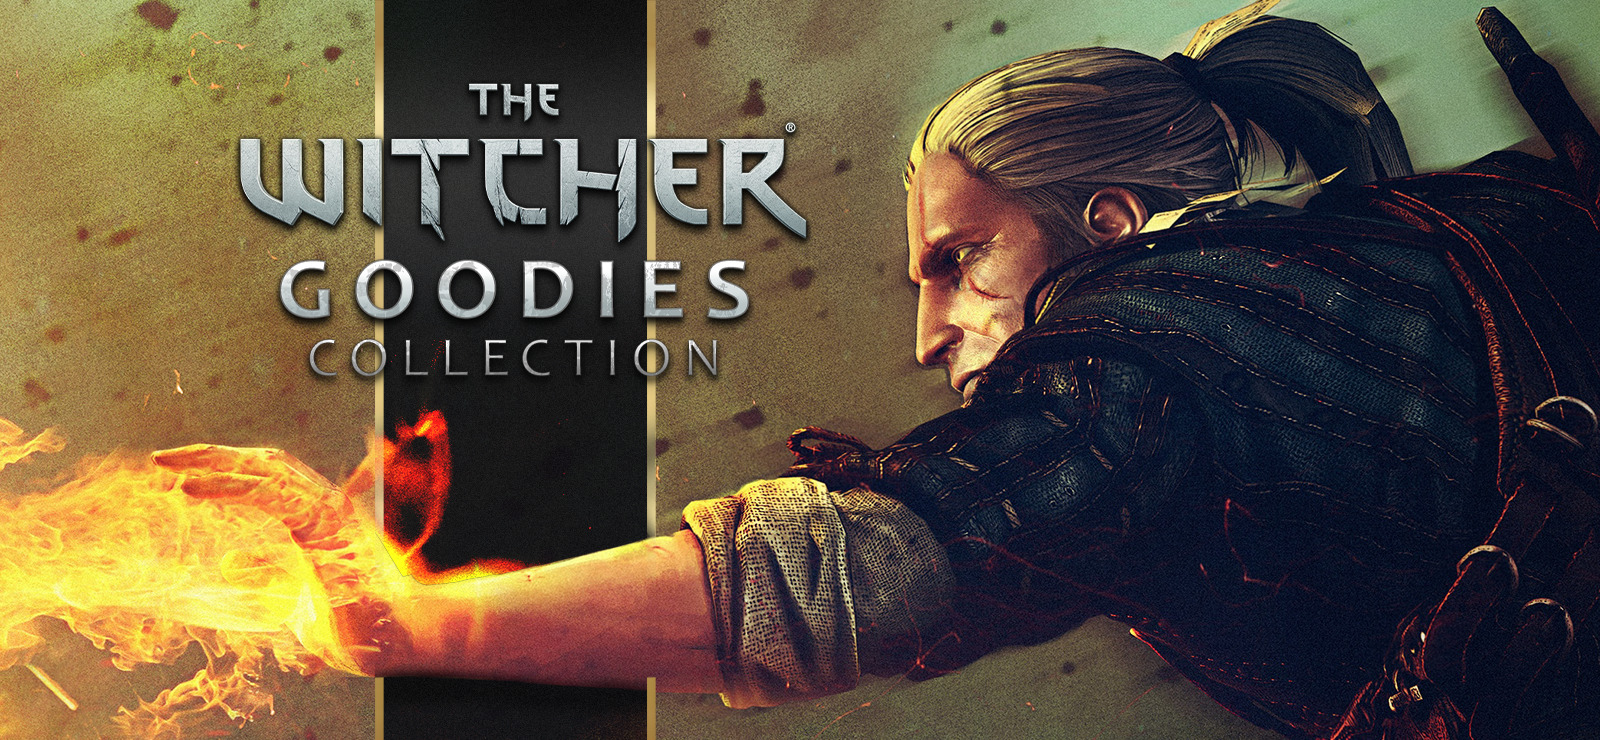 The Witcher - Goodies Collection GOG CD Key 2.54 $